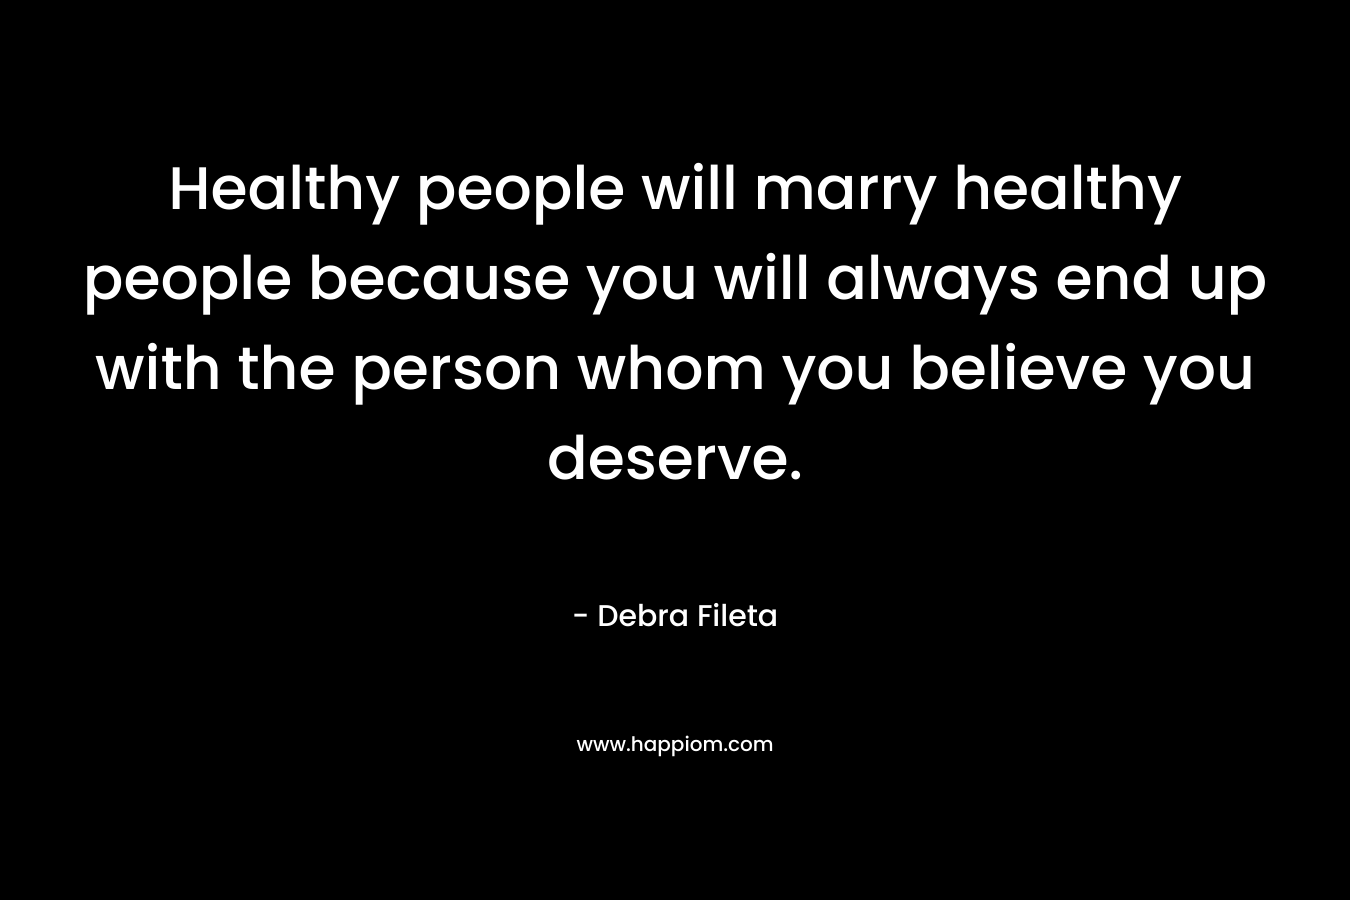 Healthy people will marry healthy people because you will always end up with the person whom you believe you deserve.